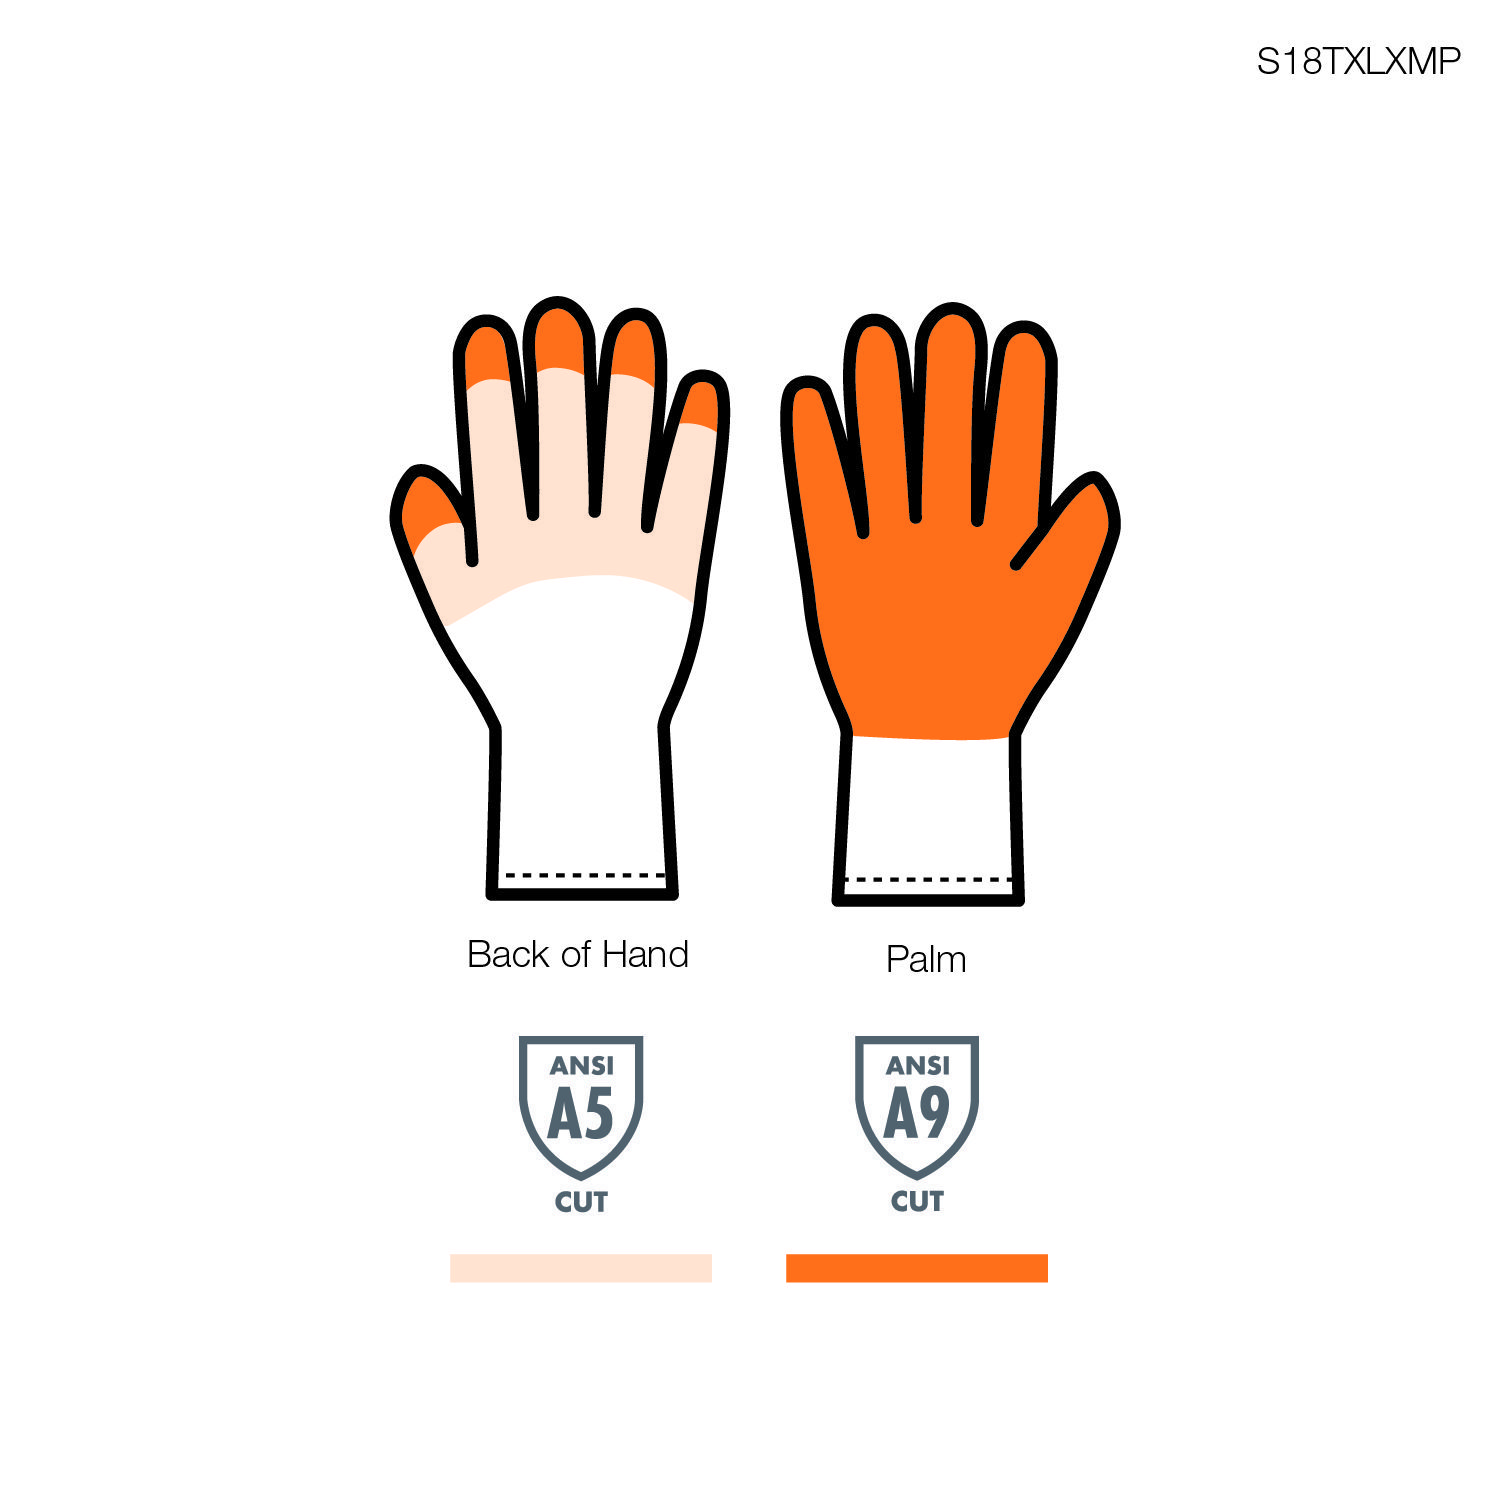 Image showing palm coating cut and puncture protection for front and back of hand